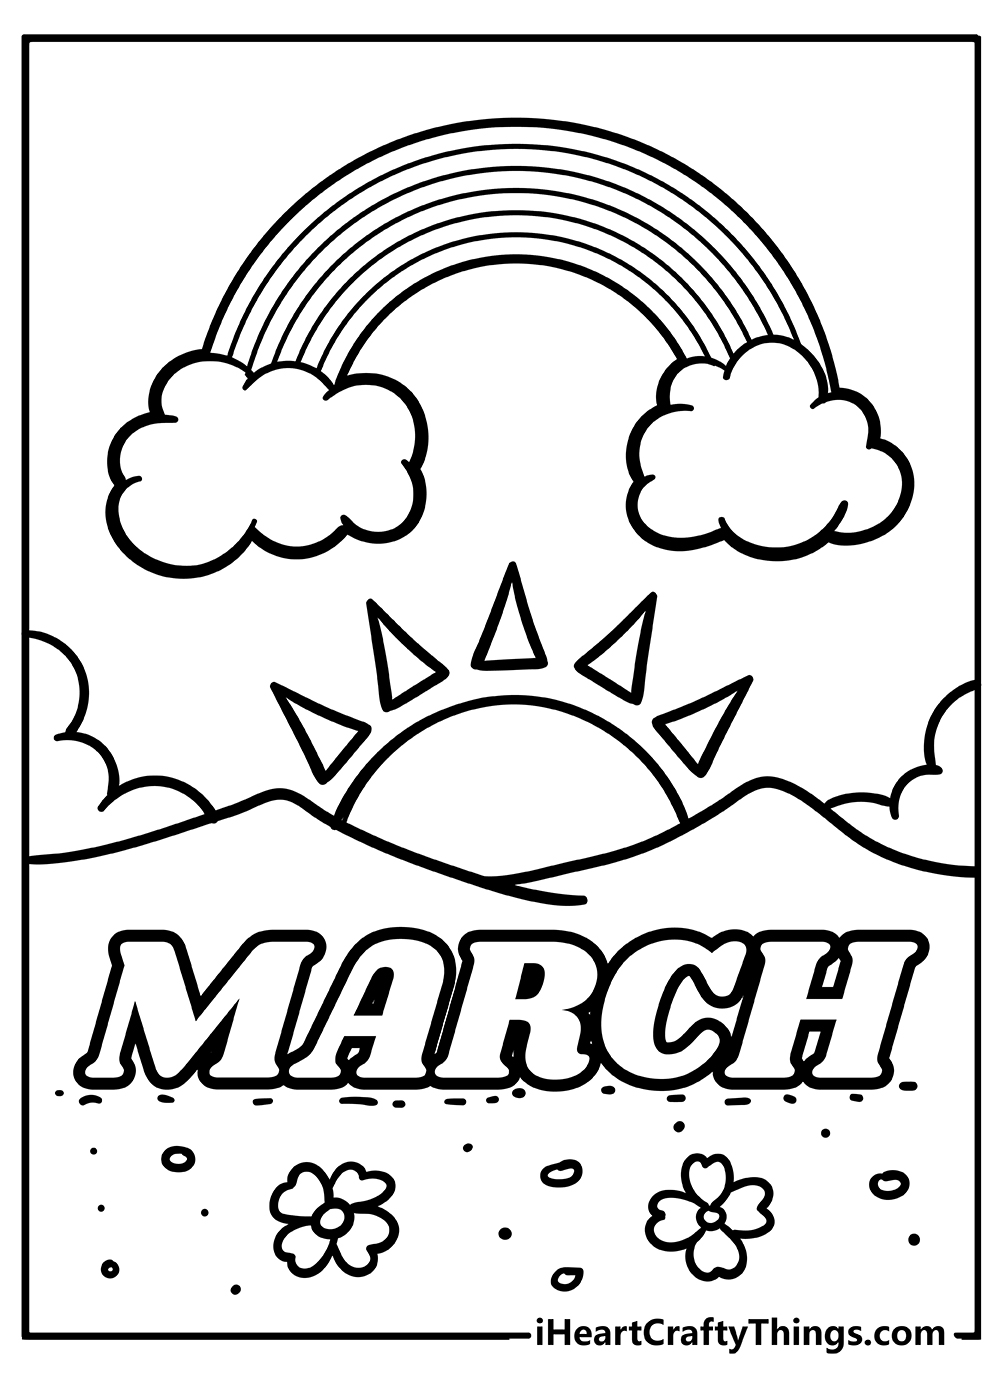 March Coloring Pages for preschoolers free printable